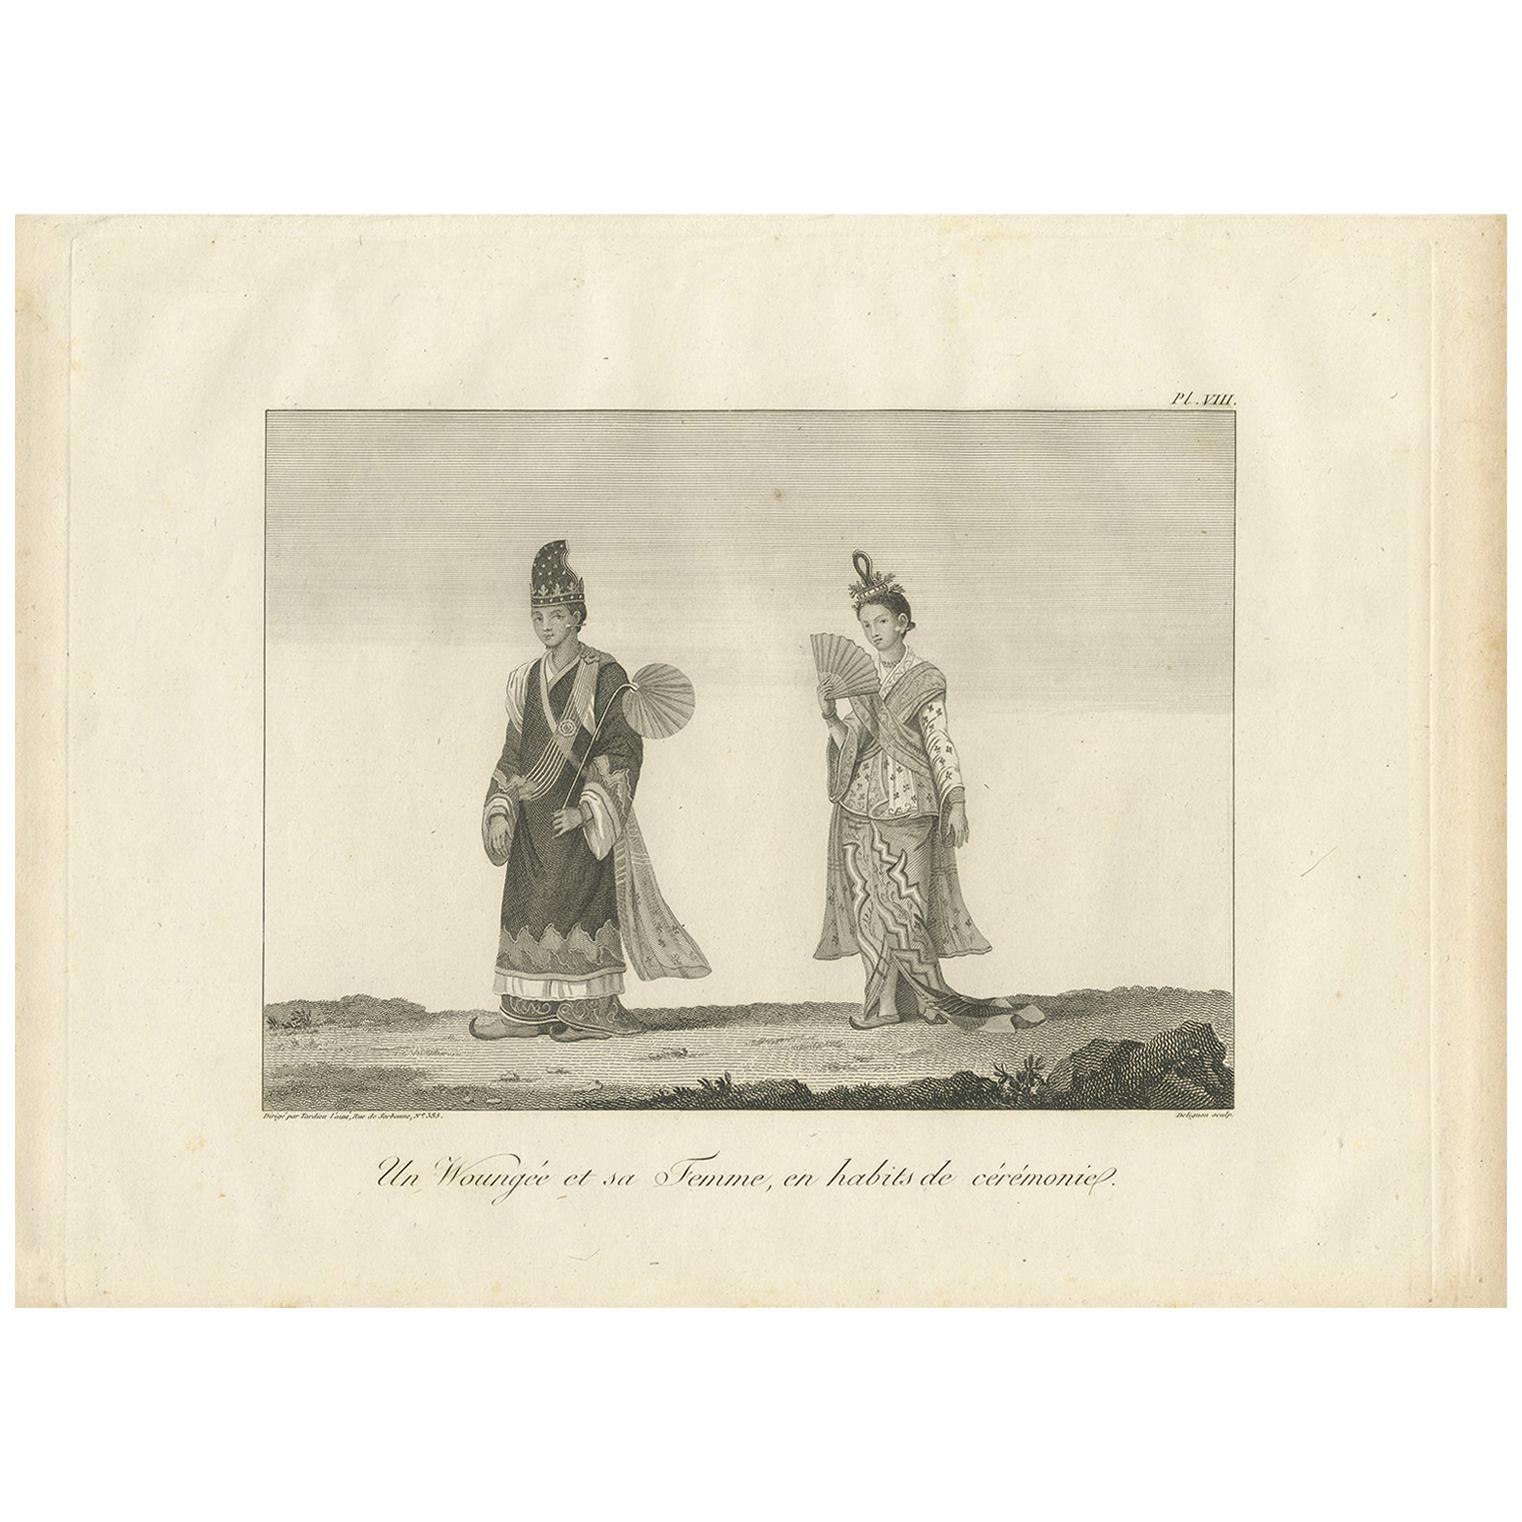 Antique Print of a Burmese member of the Council of State by Symes (1800)